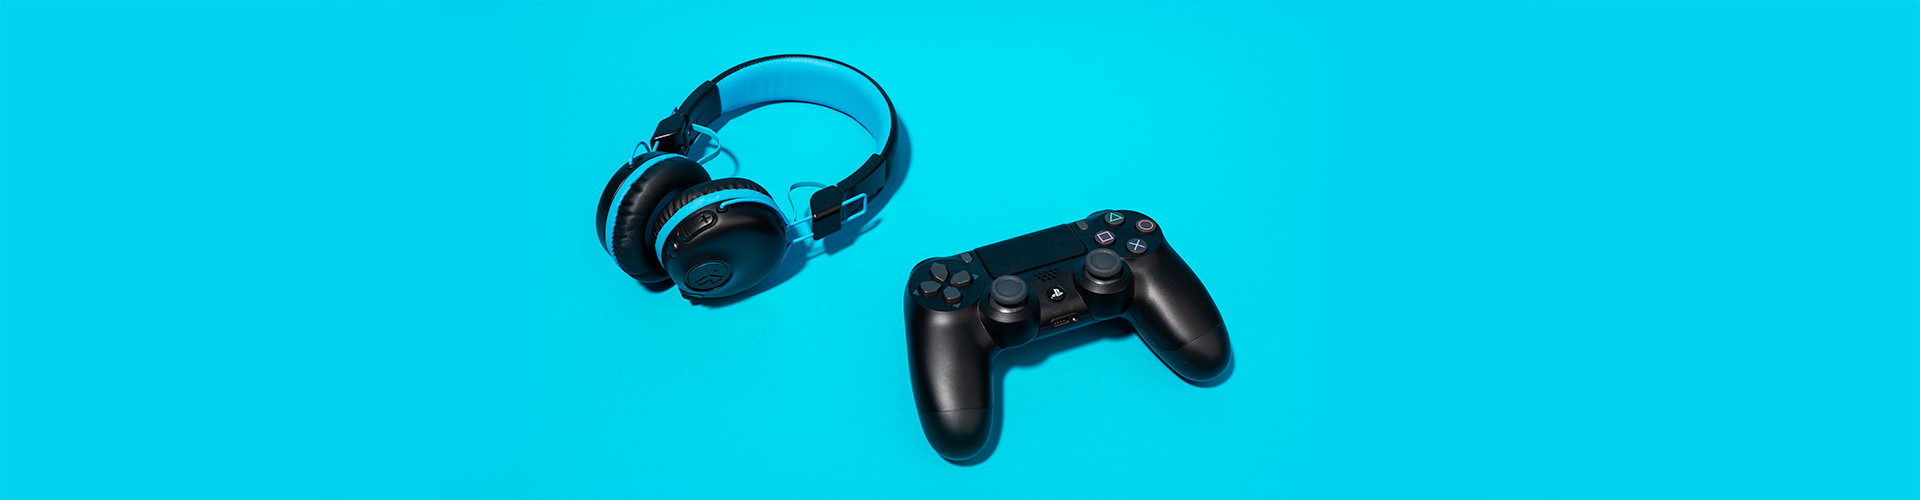 How to connect Bluetooth headphones to a PS5